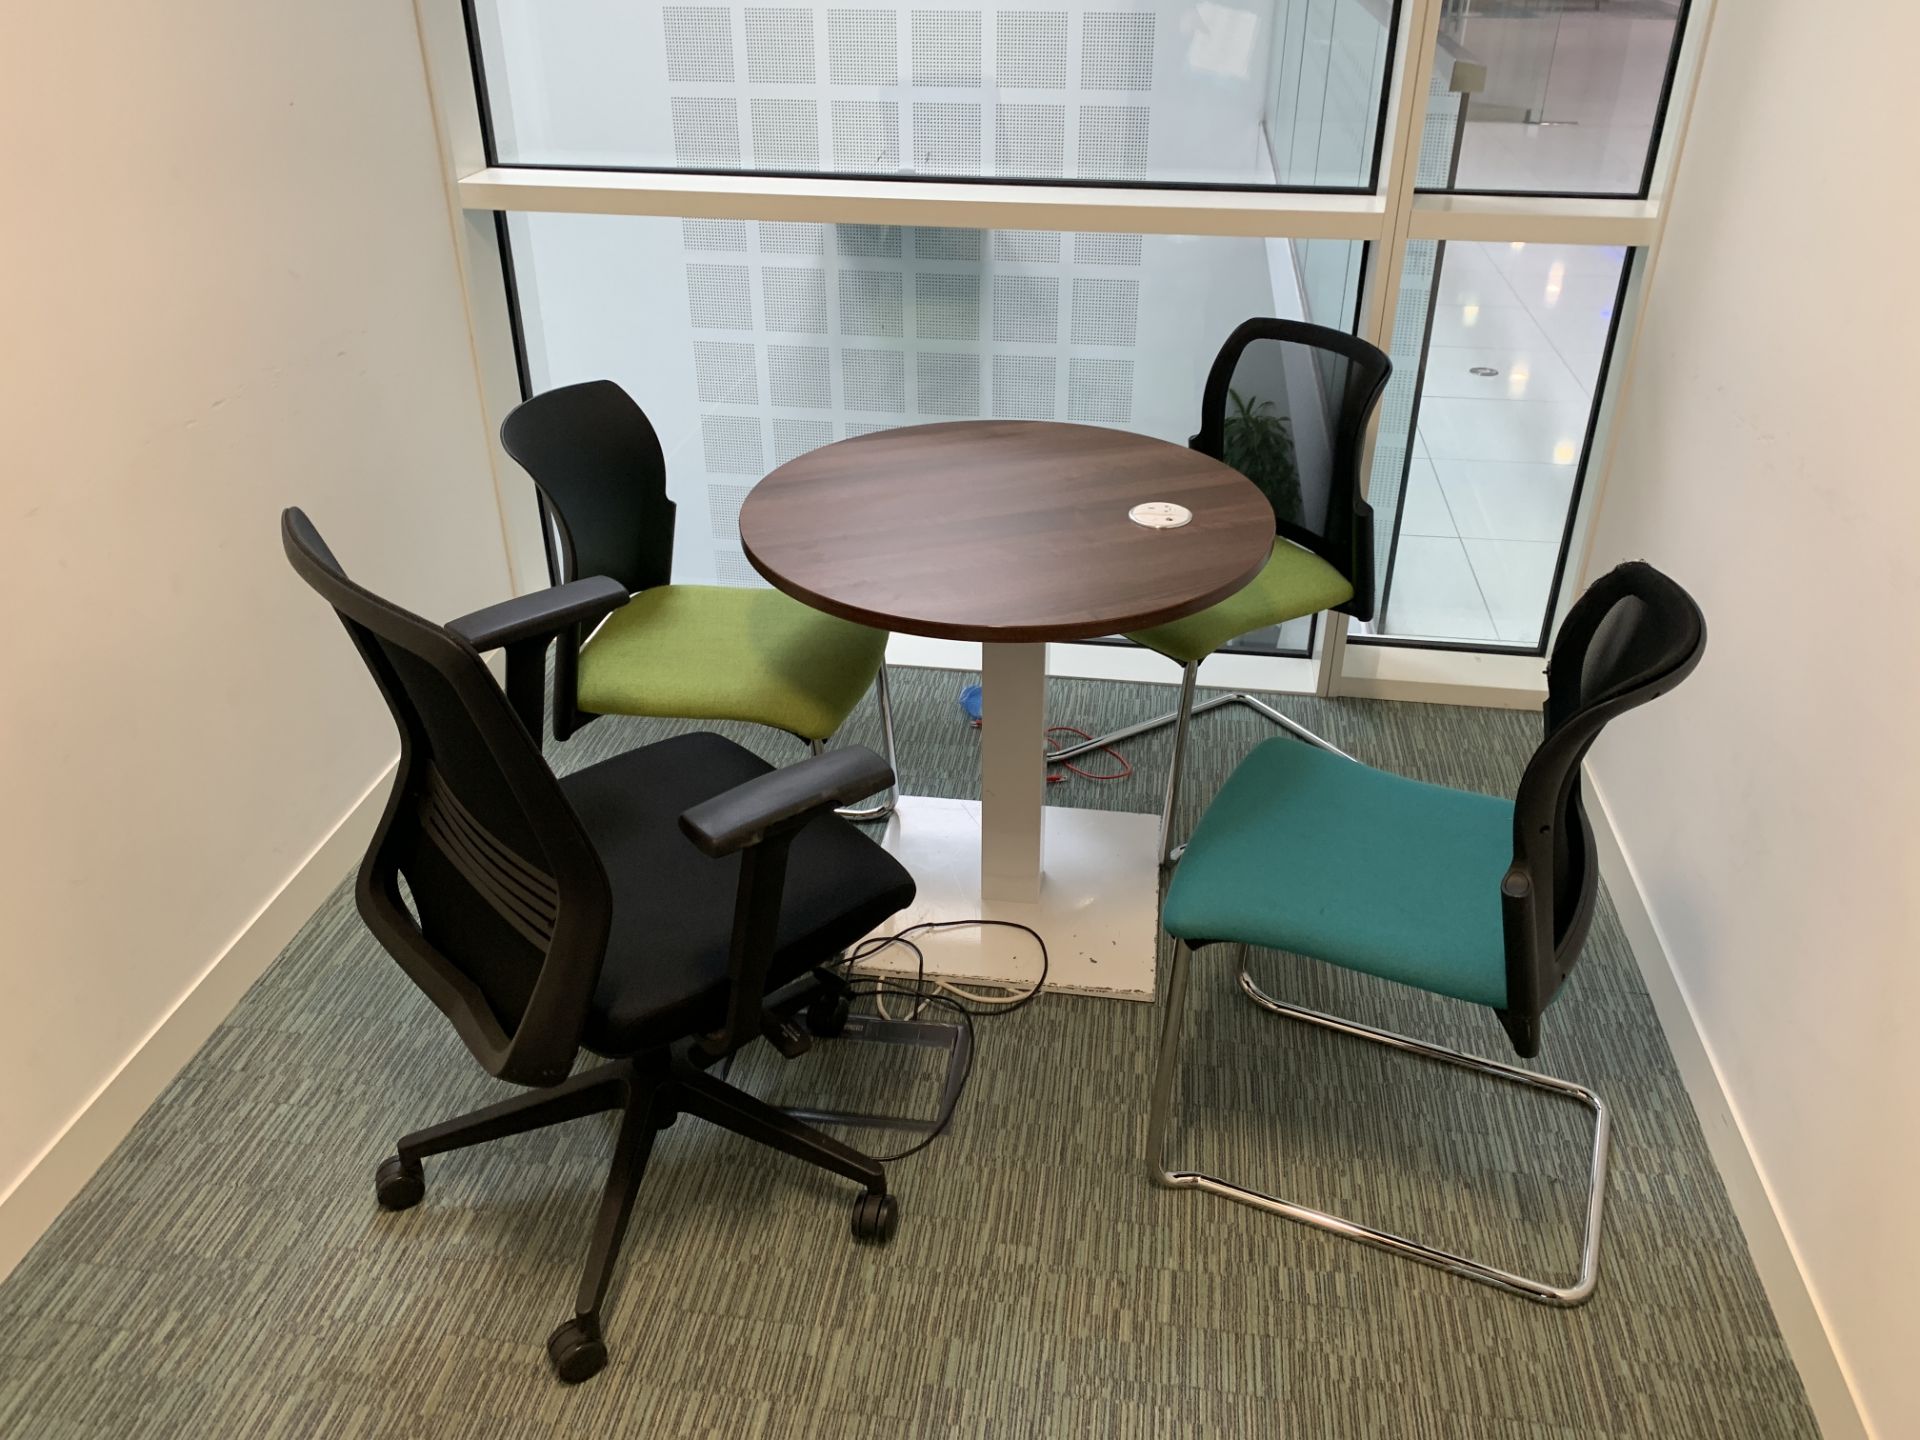 MEETING ROOM 1 INCLUDING ROUND SOLID WOOD TABLE WITH ELECTRICAL SOCKET AND 4 CHAIRS